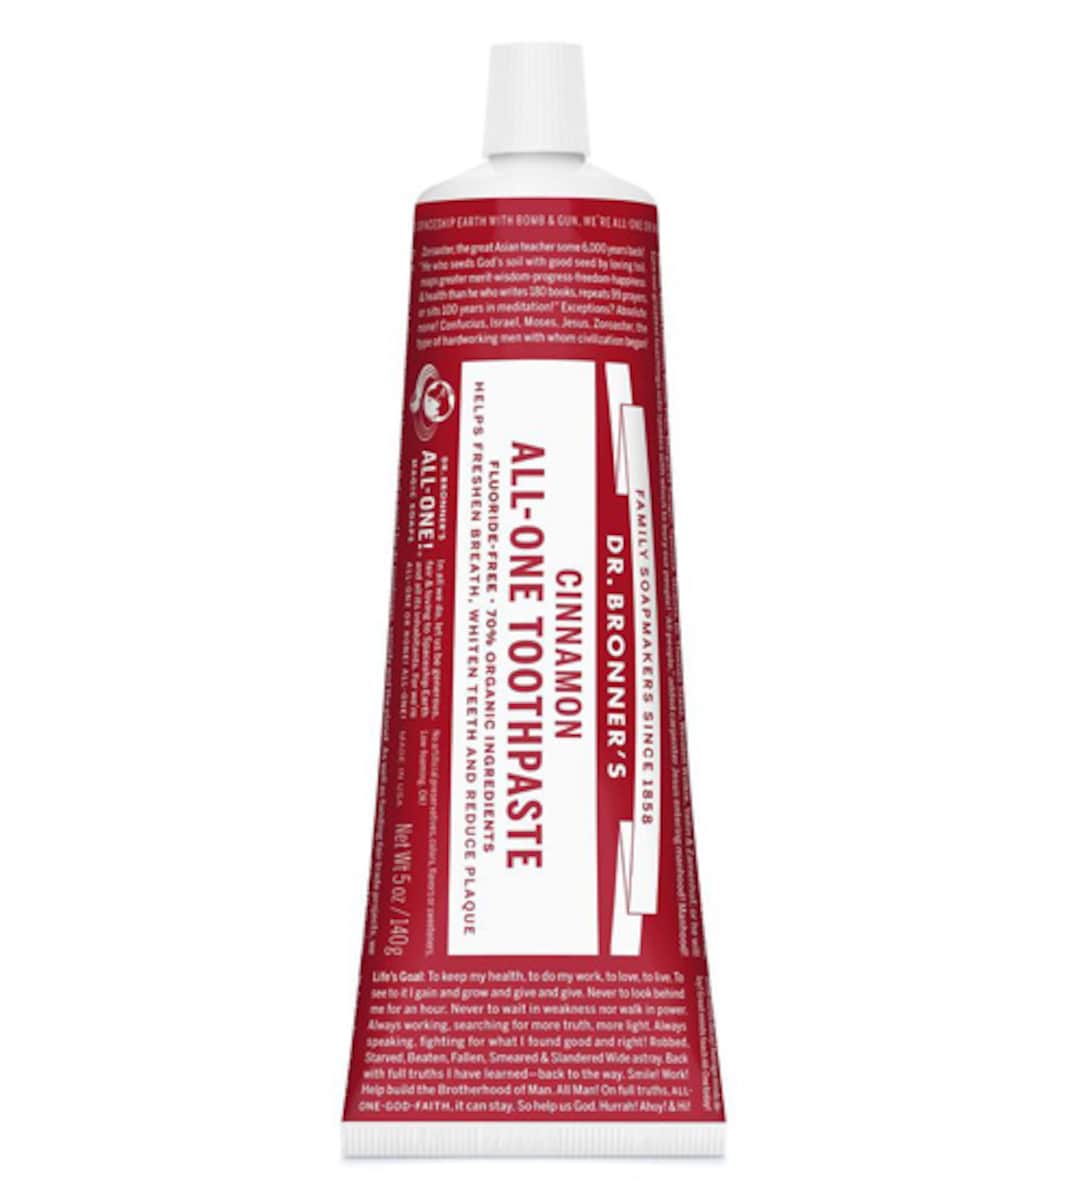 Dr Bronner's Cinnamon All-One Toothpaste 140g